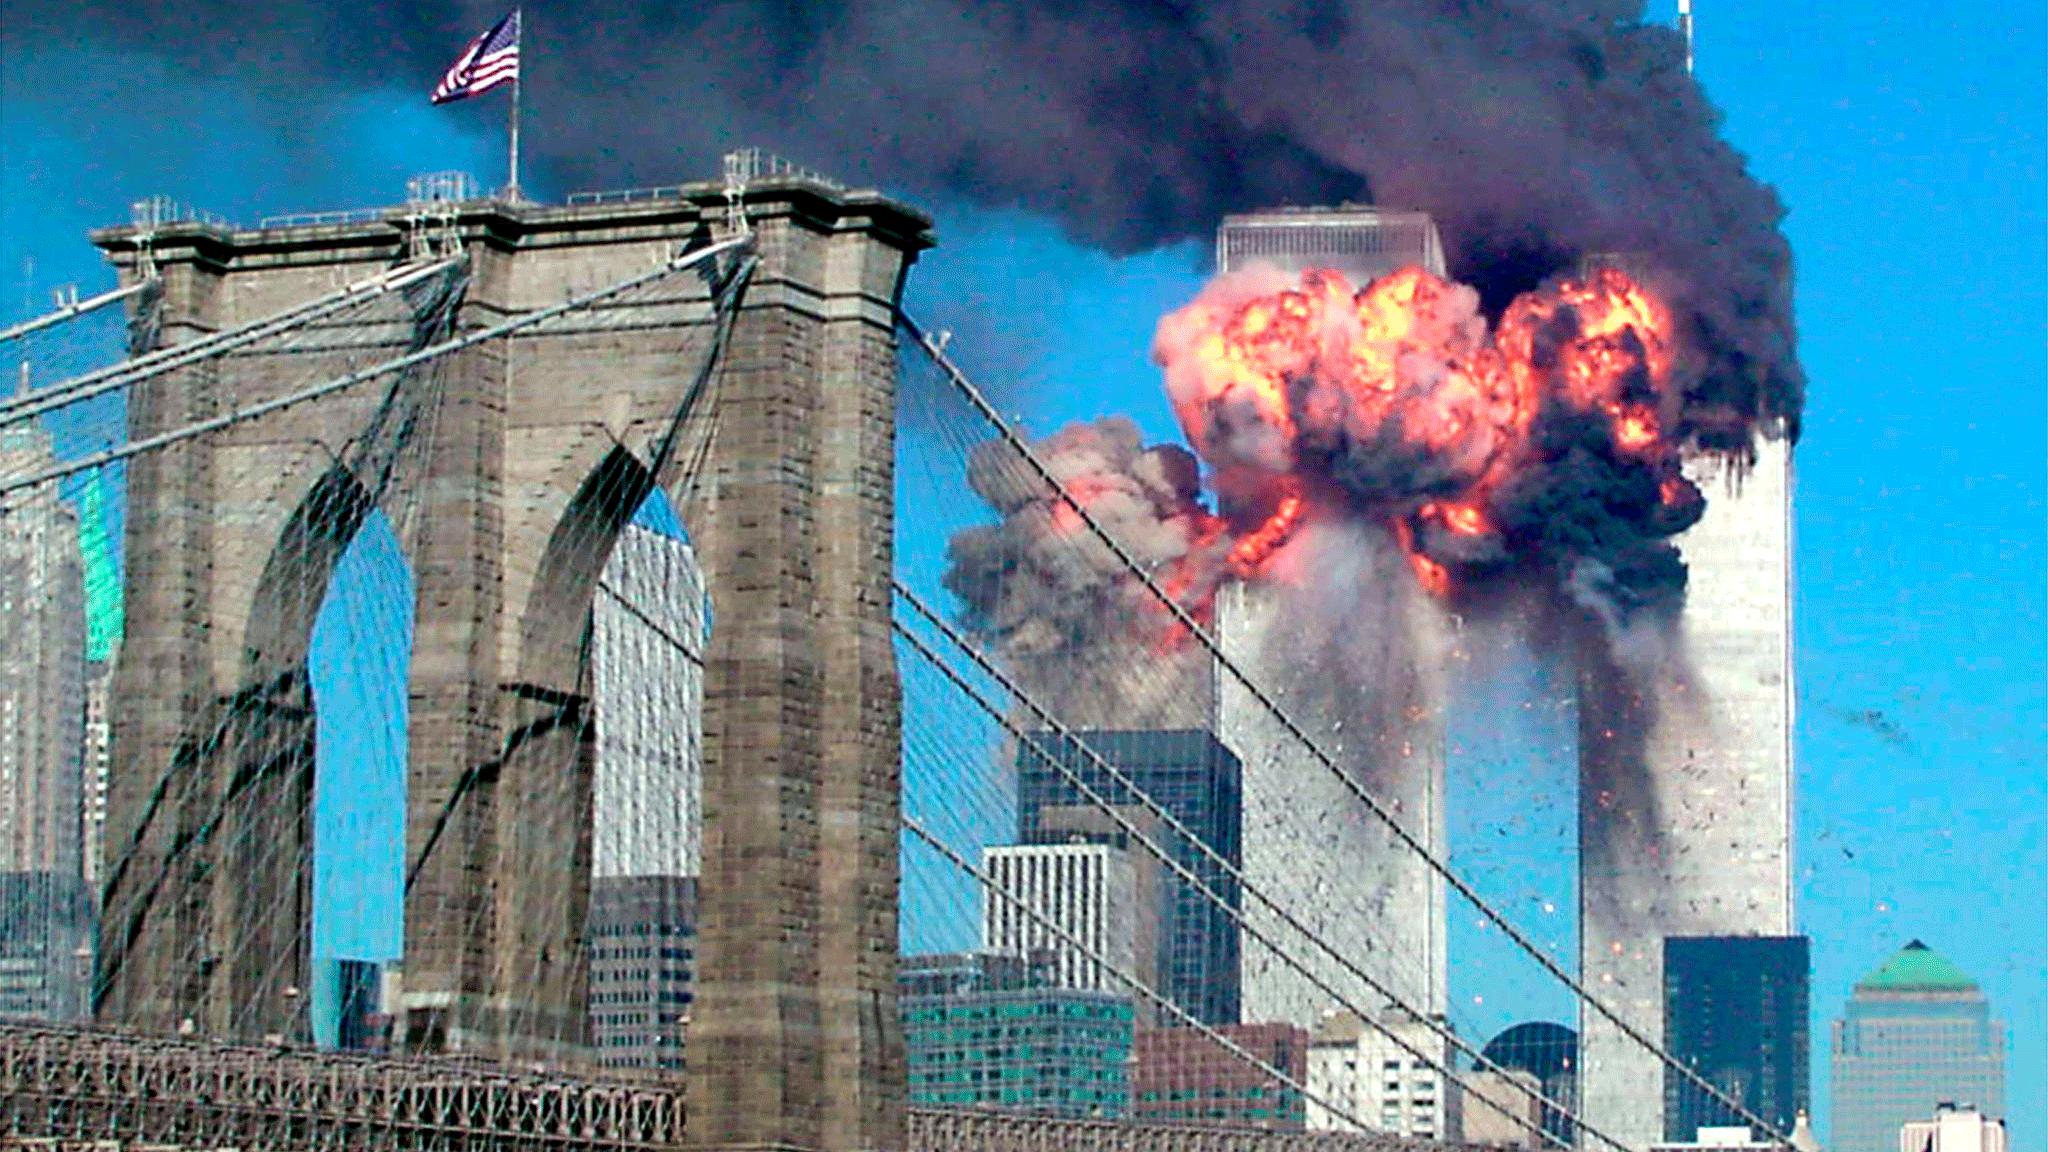 The second tower of the World Trade Center bursts into flames after being hit by a hijacked airplane in New York in this 9/11/01 file photograph. The Brooklyn bridge is seen in the foreground on 9/11, 2001.